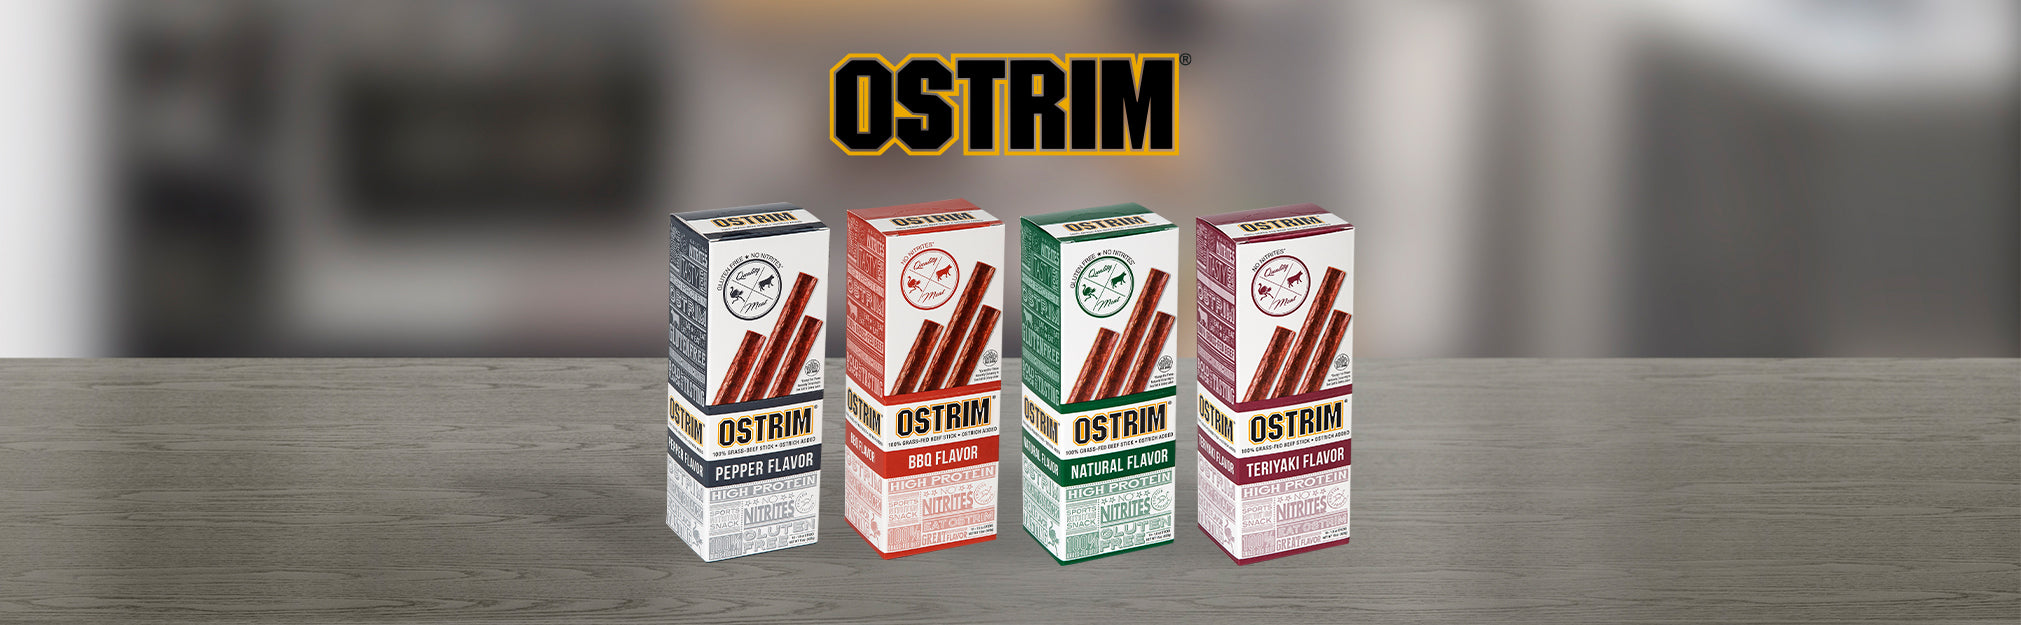 Ostrim Gift Boxes